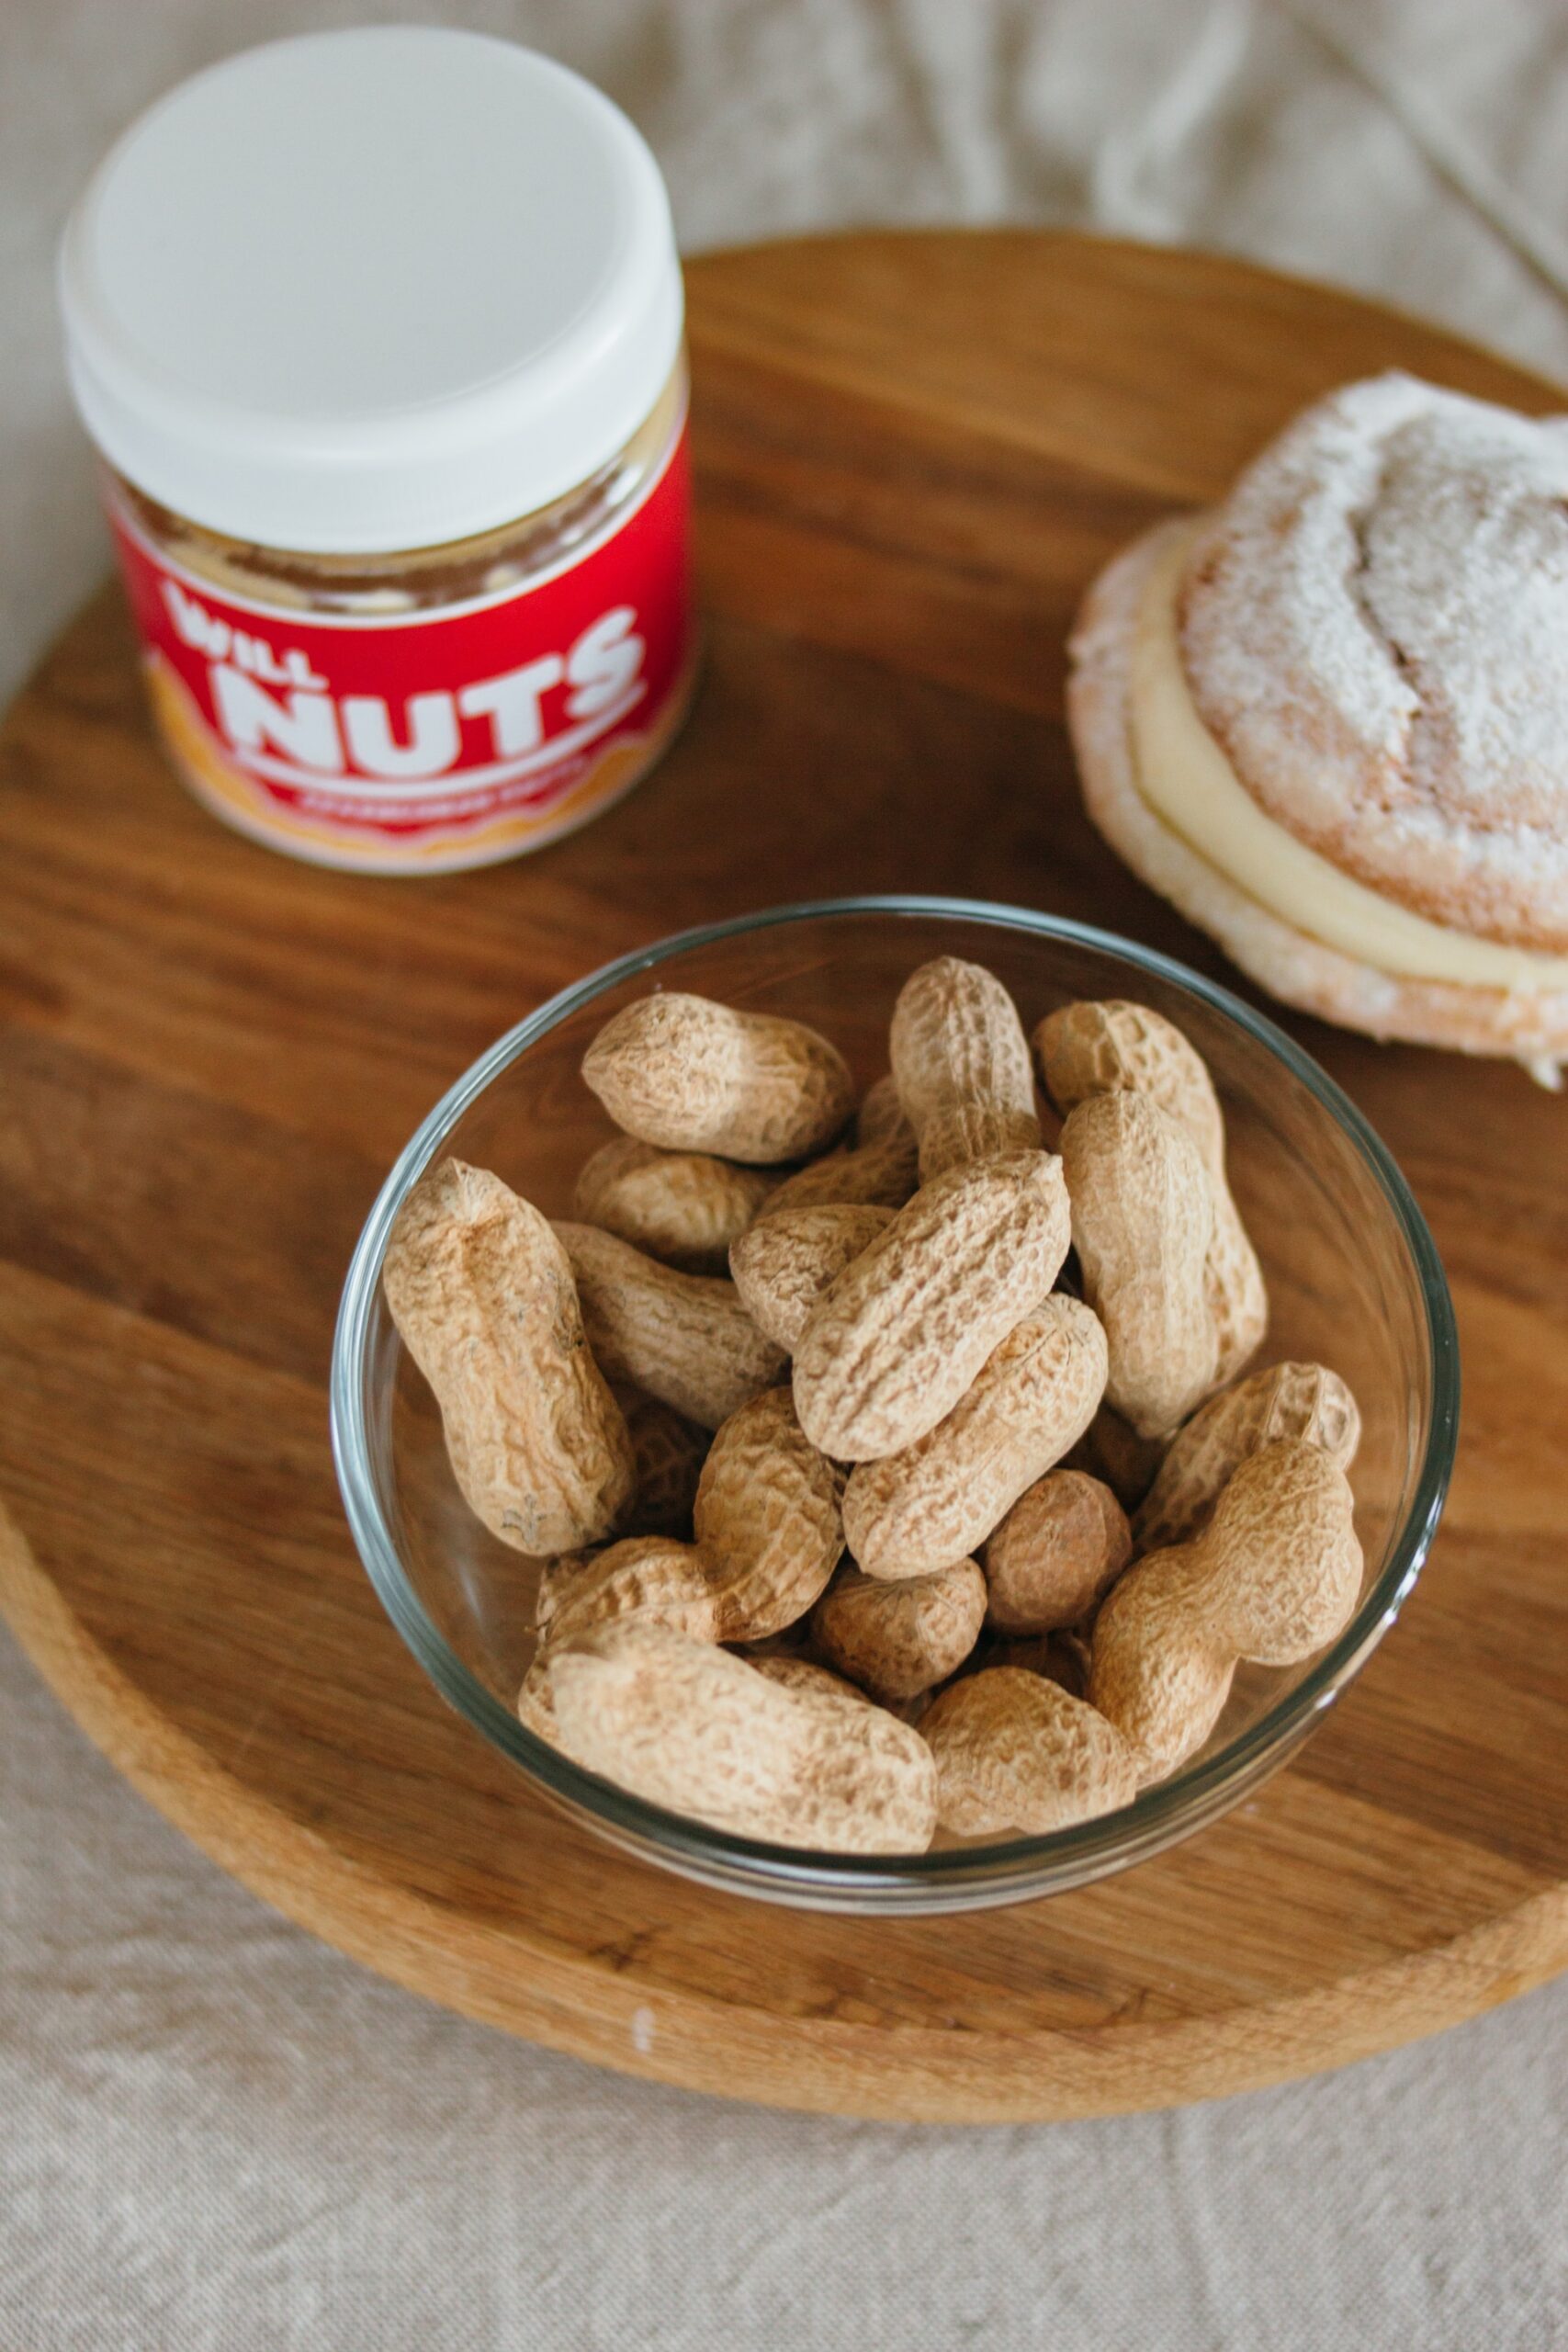 Peanut Nutrition Value and Benefits